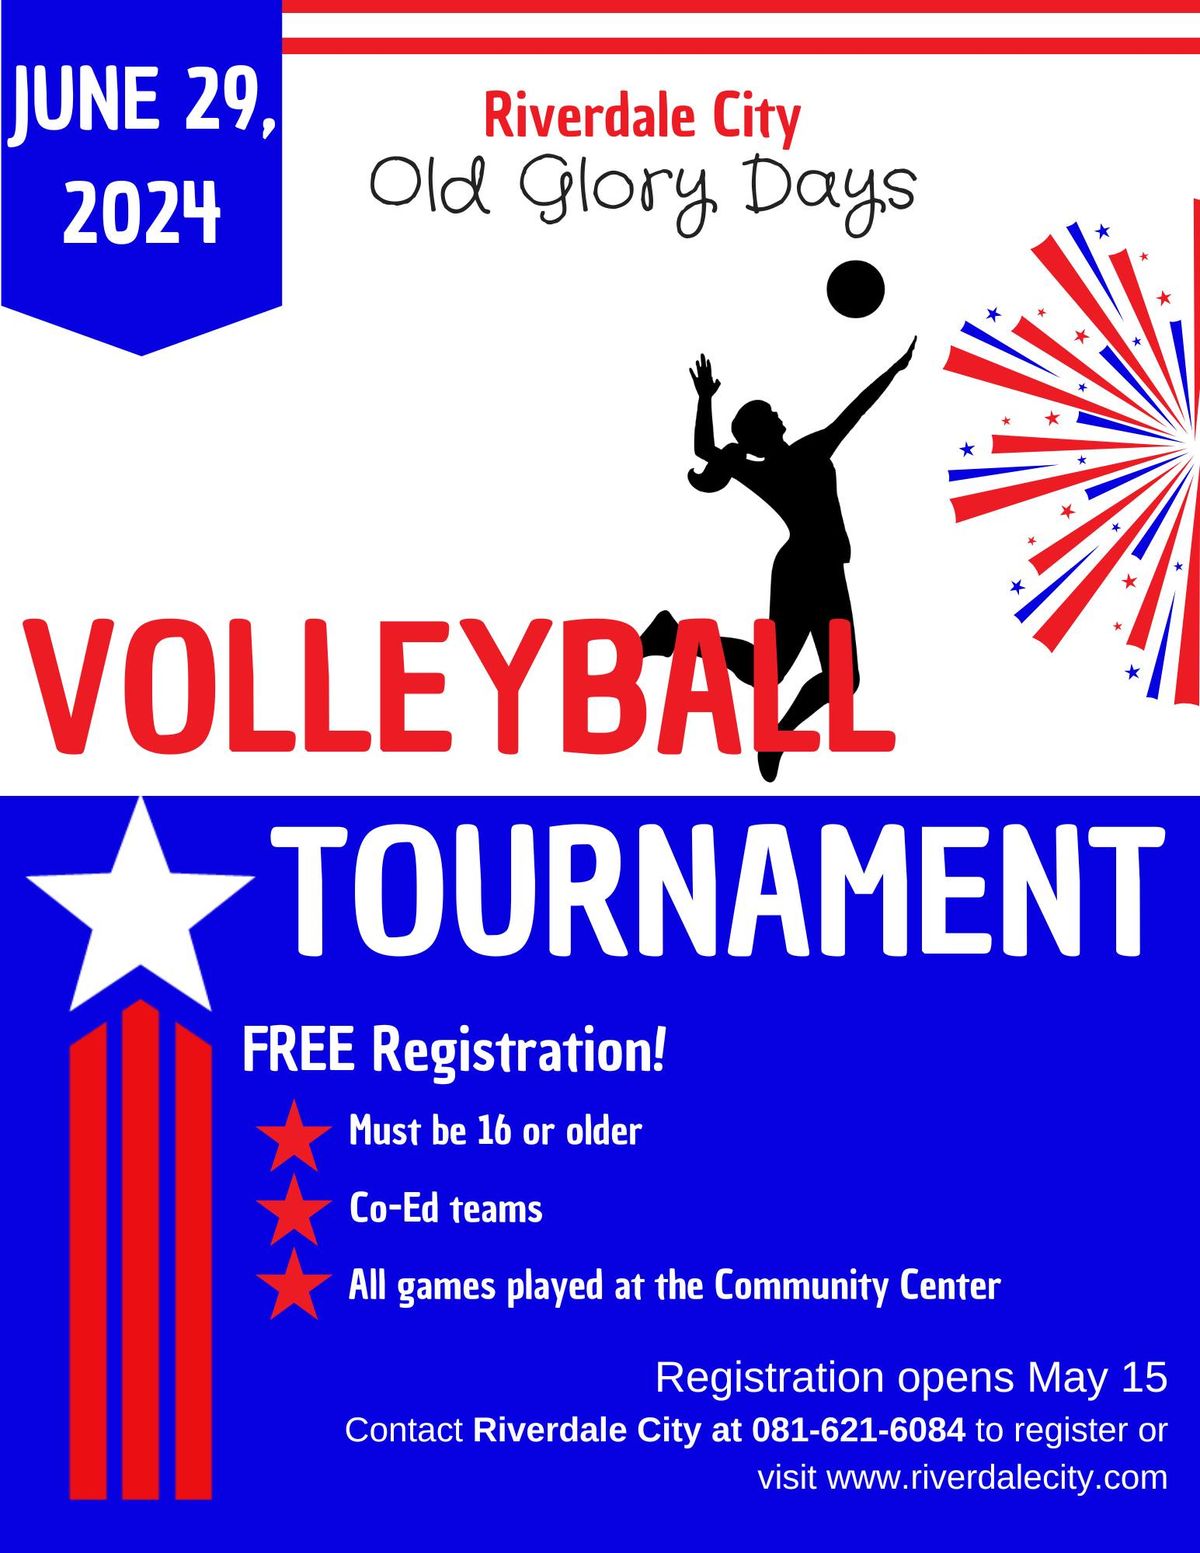 Old Glory Days Volleyball Tournament